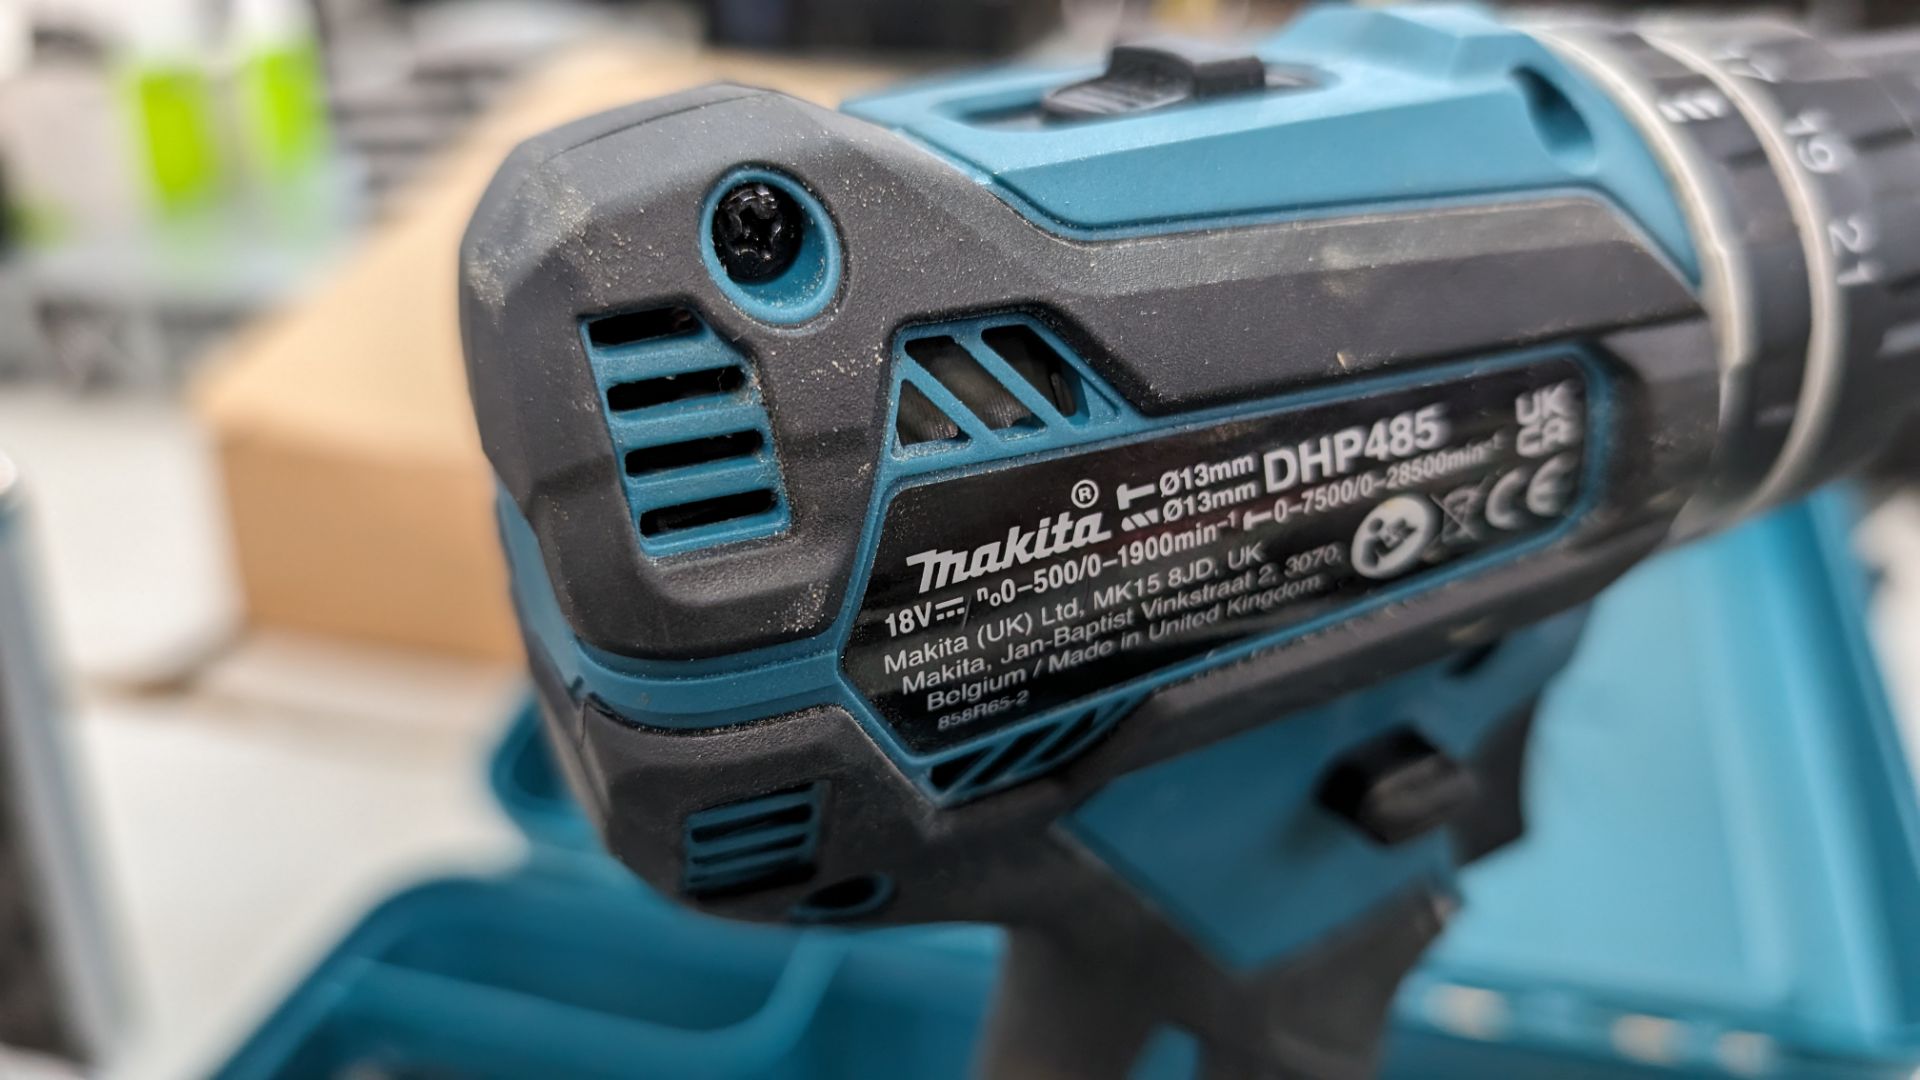 Makita cordless driver model DHP485 including 18V battery, charger & dedicated case - Image 7 of 12